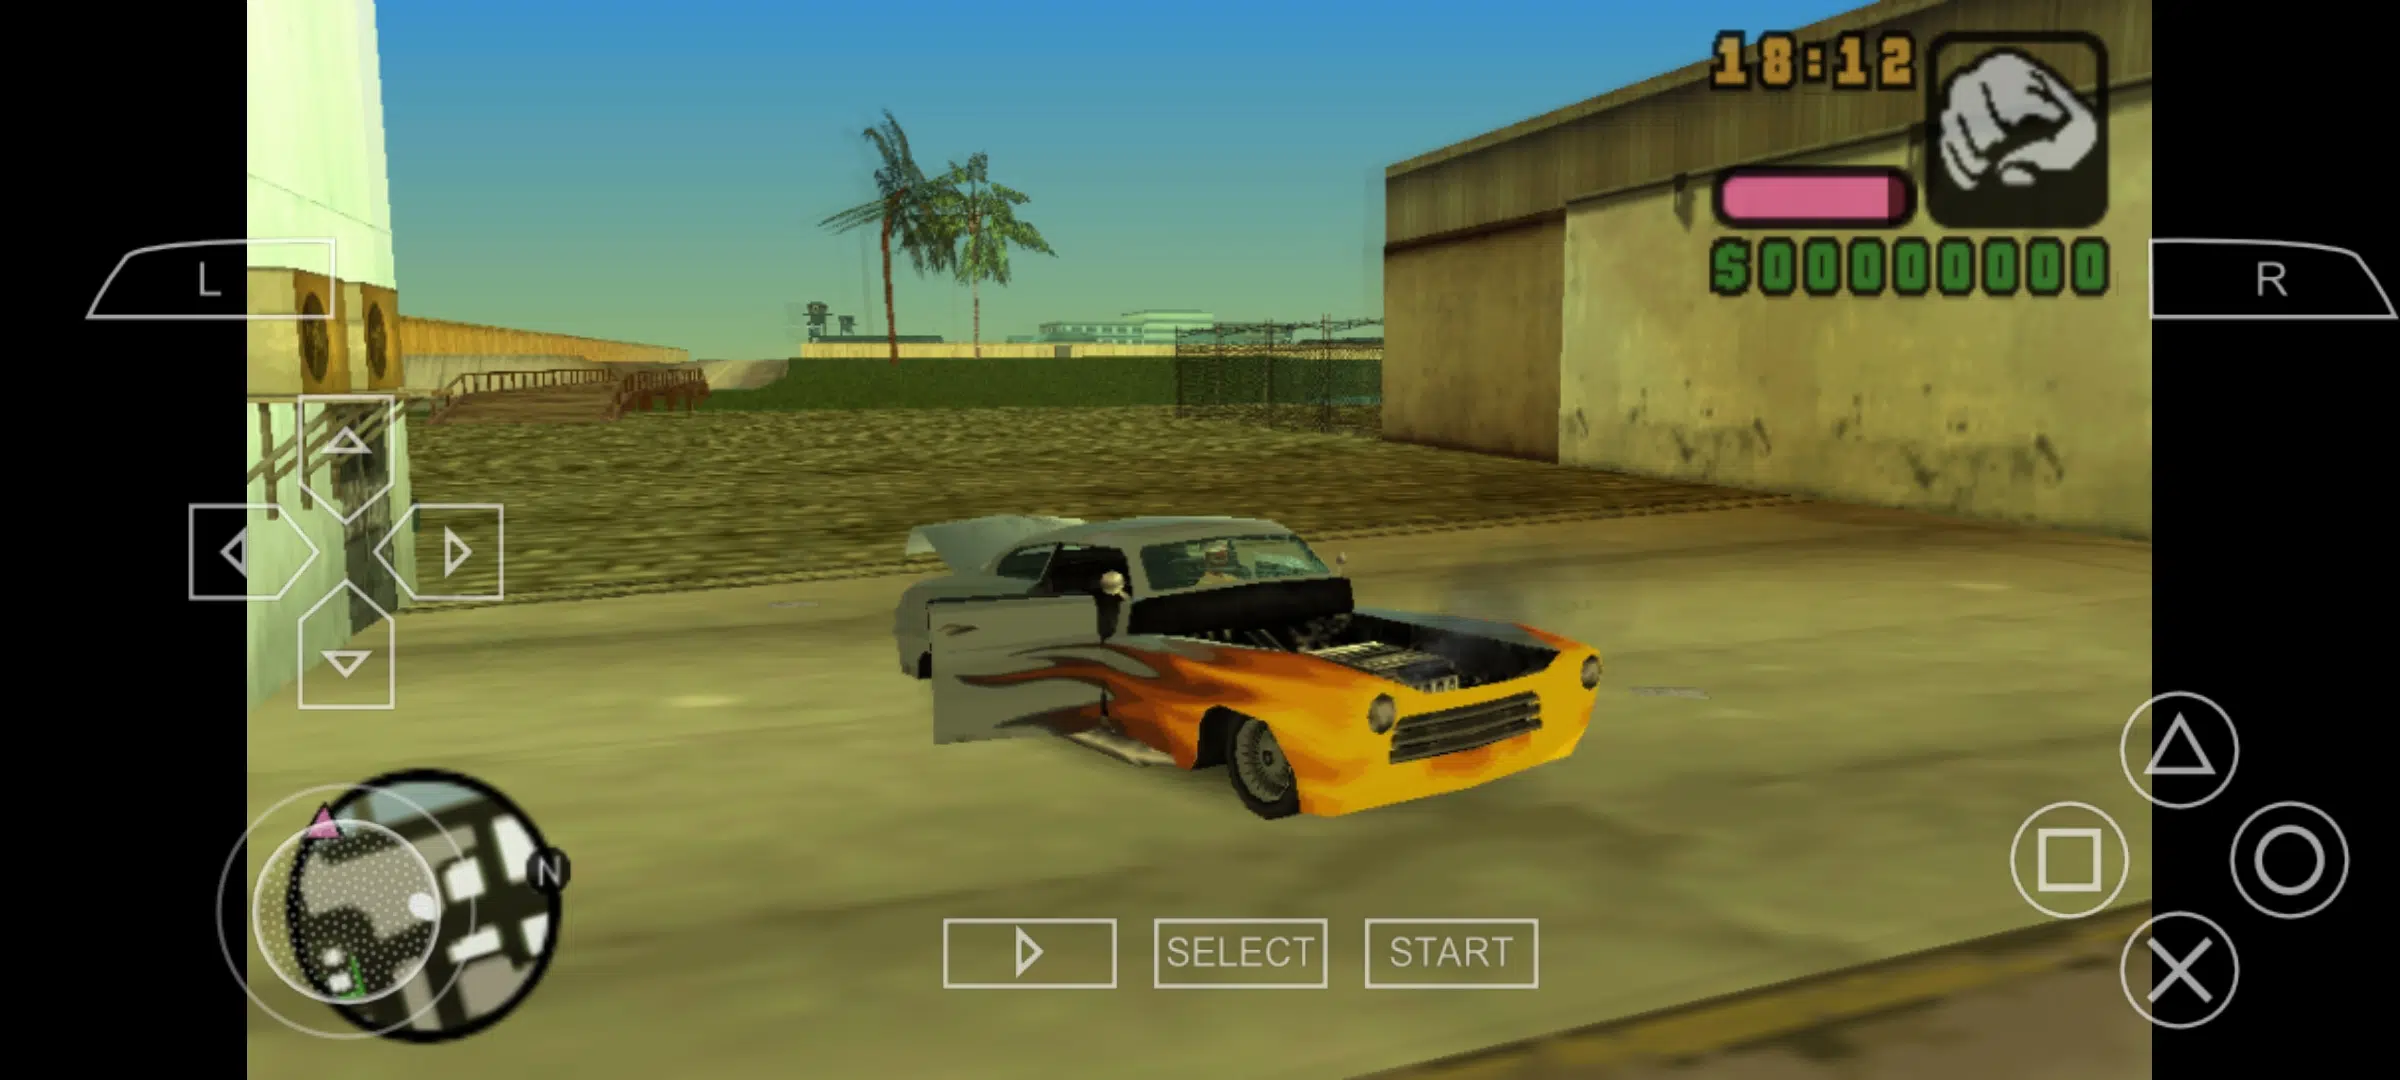 Grand Theft Auto Vice City Stories on Mobile with PSP Emulator for Android - PPSSPP